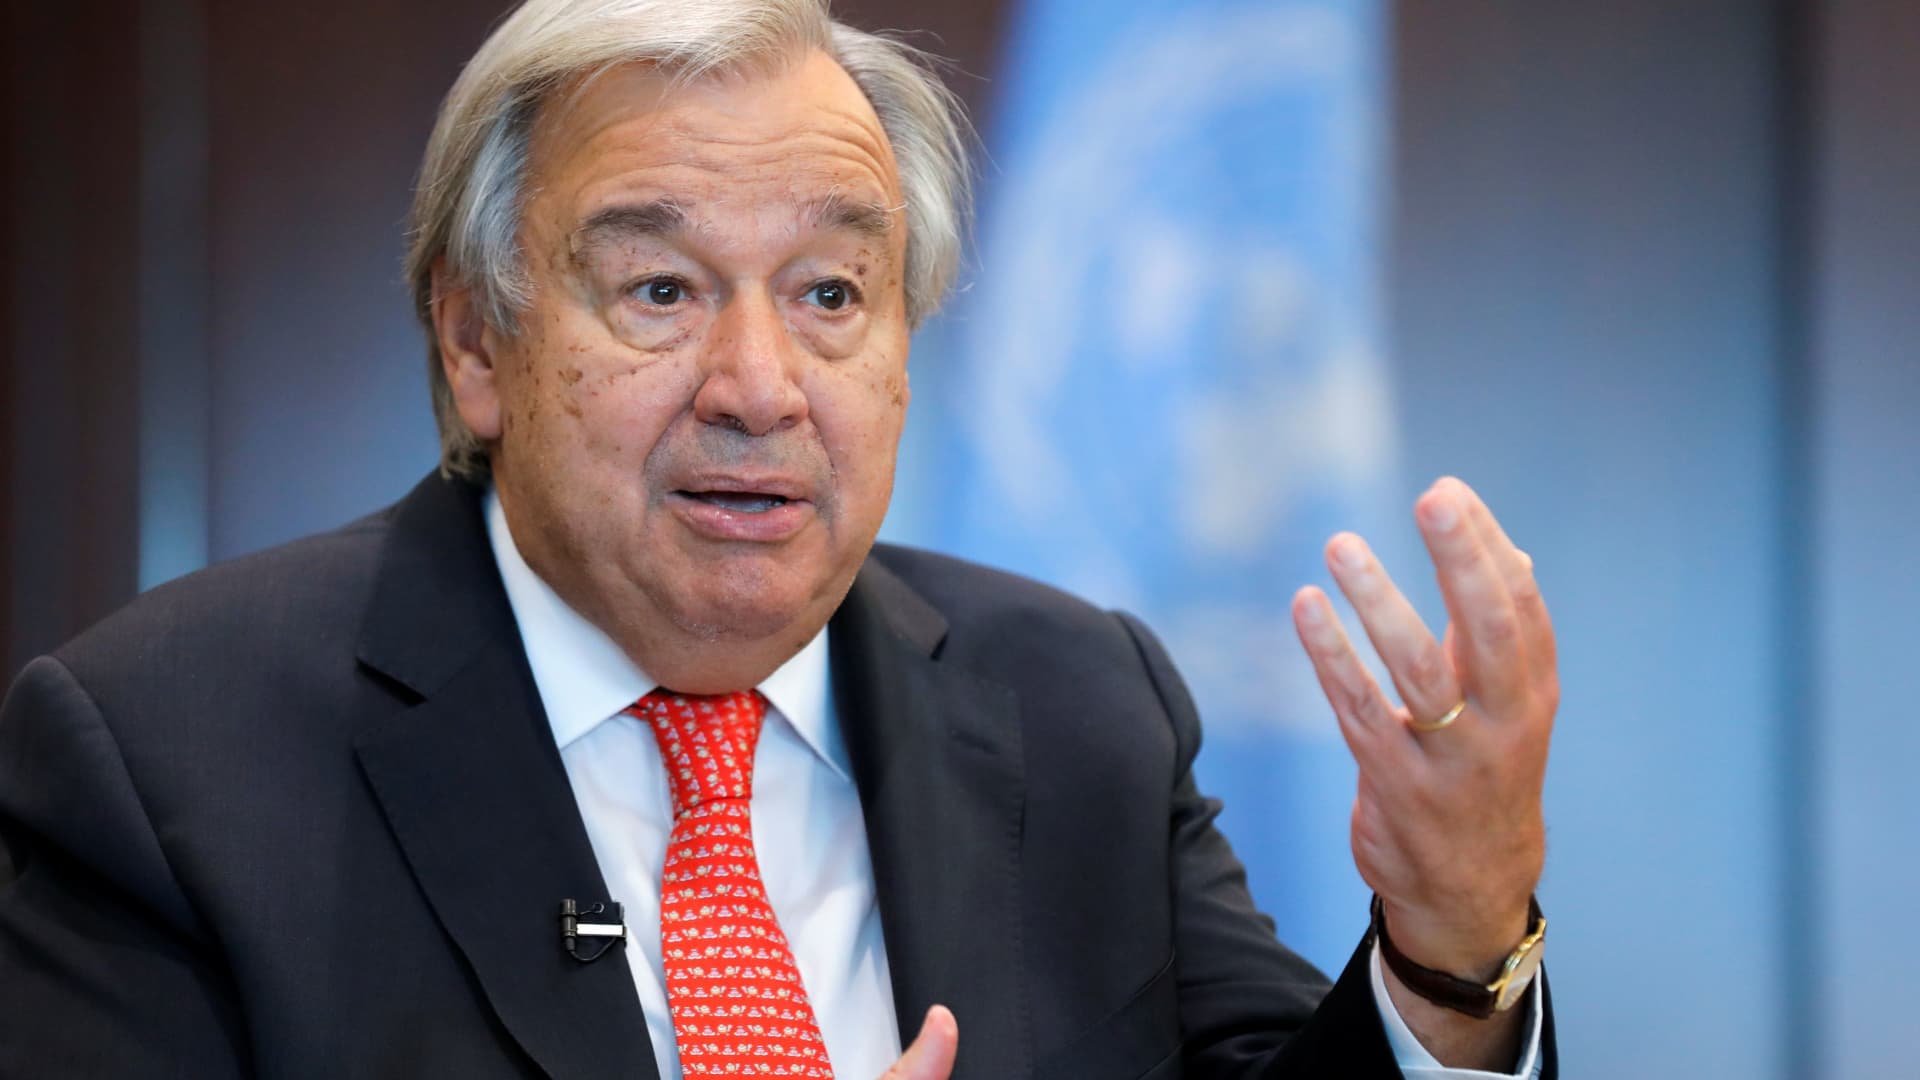 United Nations Secretary-General Antonio Guterres gestures during an interview with Reuters at the United Nations Headquarters in Manhattan, New York, September 15, 2021.